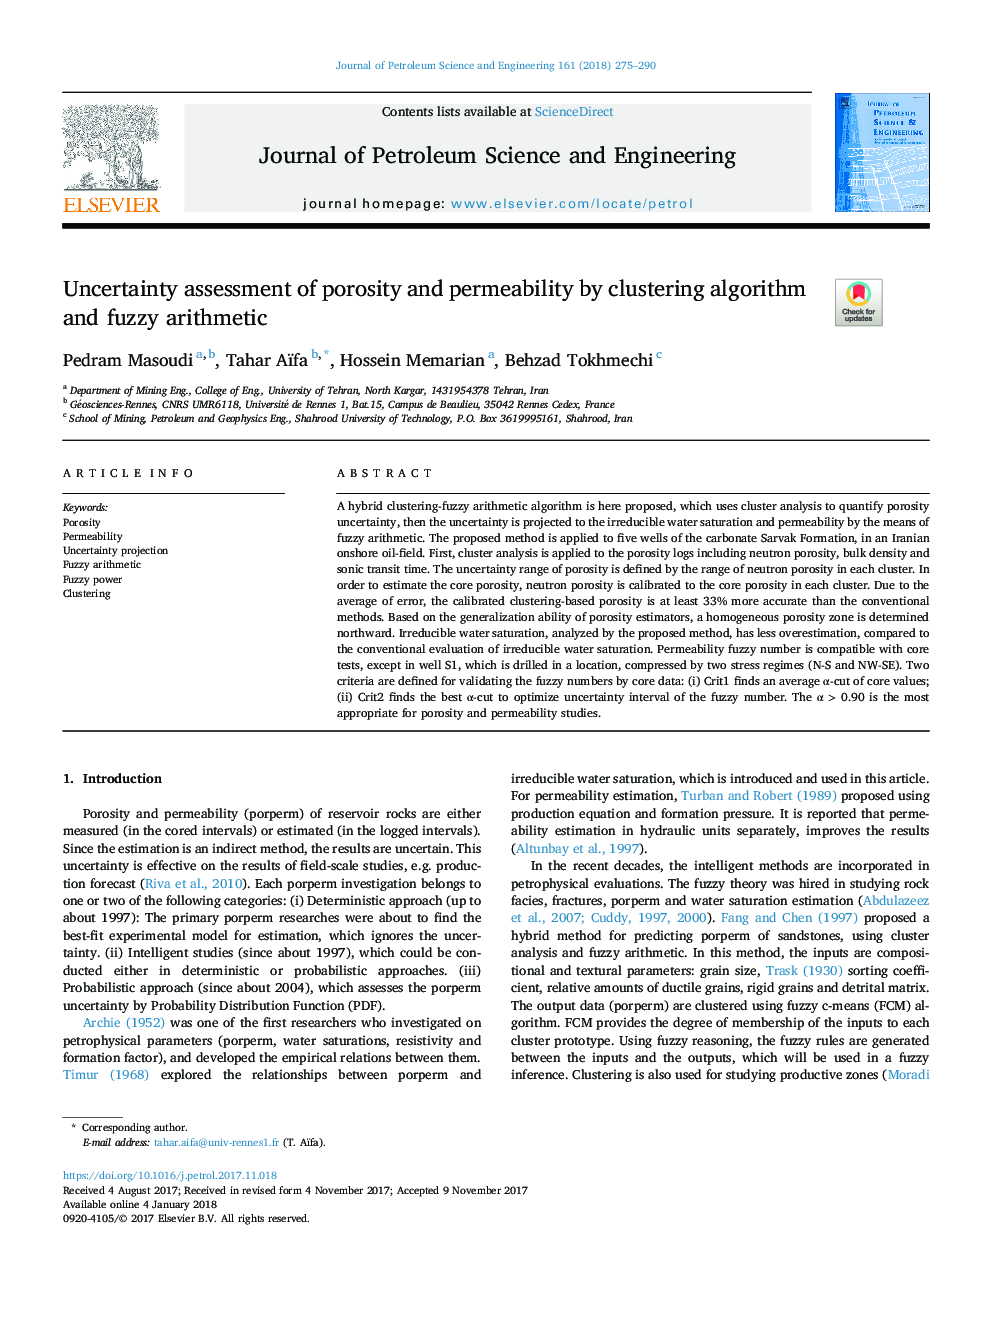 Uncertainty assessment of porosity and permeability by clustering algorithm and fuzzy arithmetic